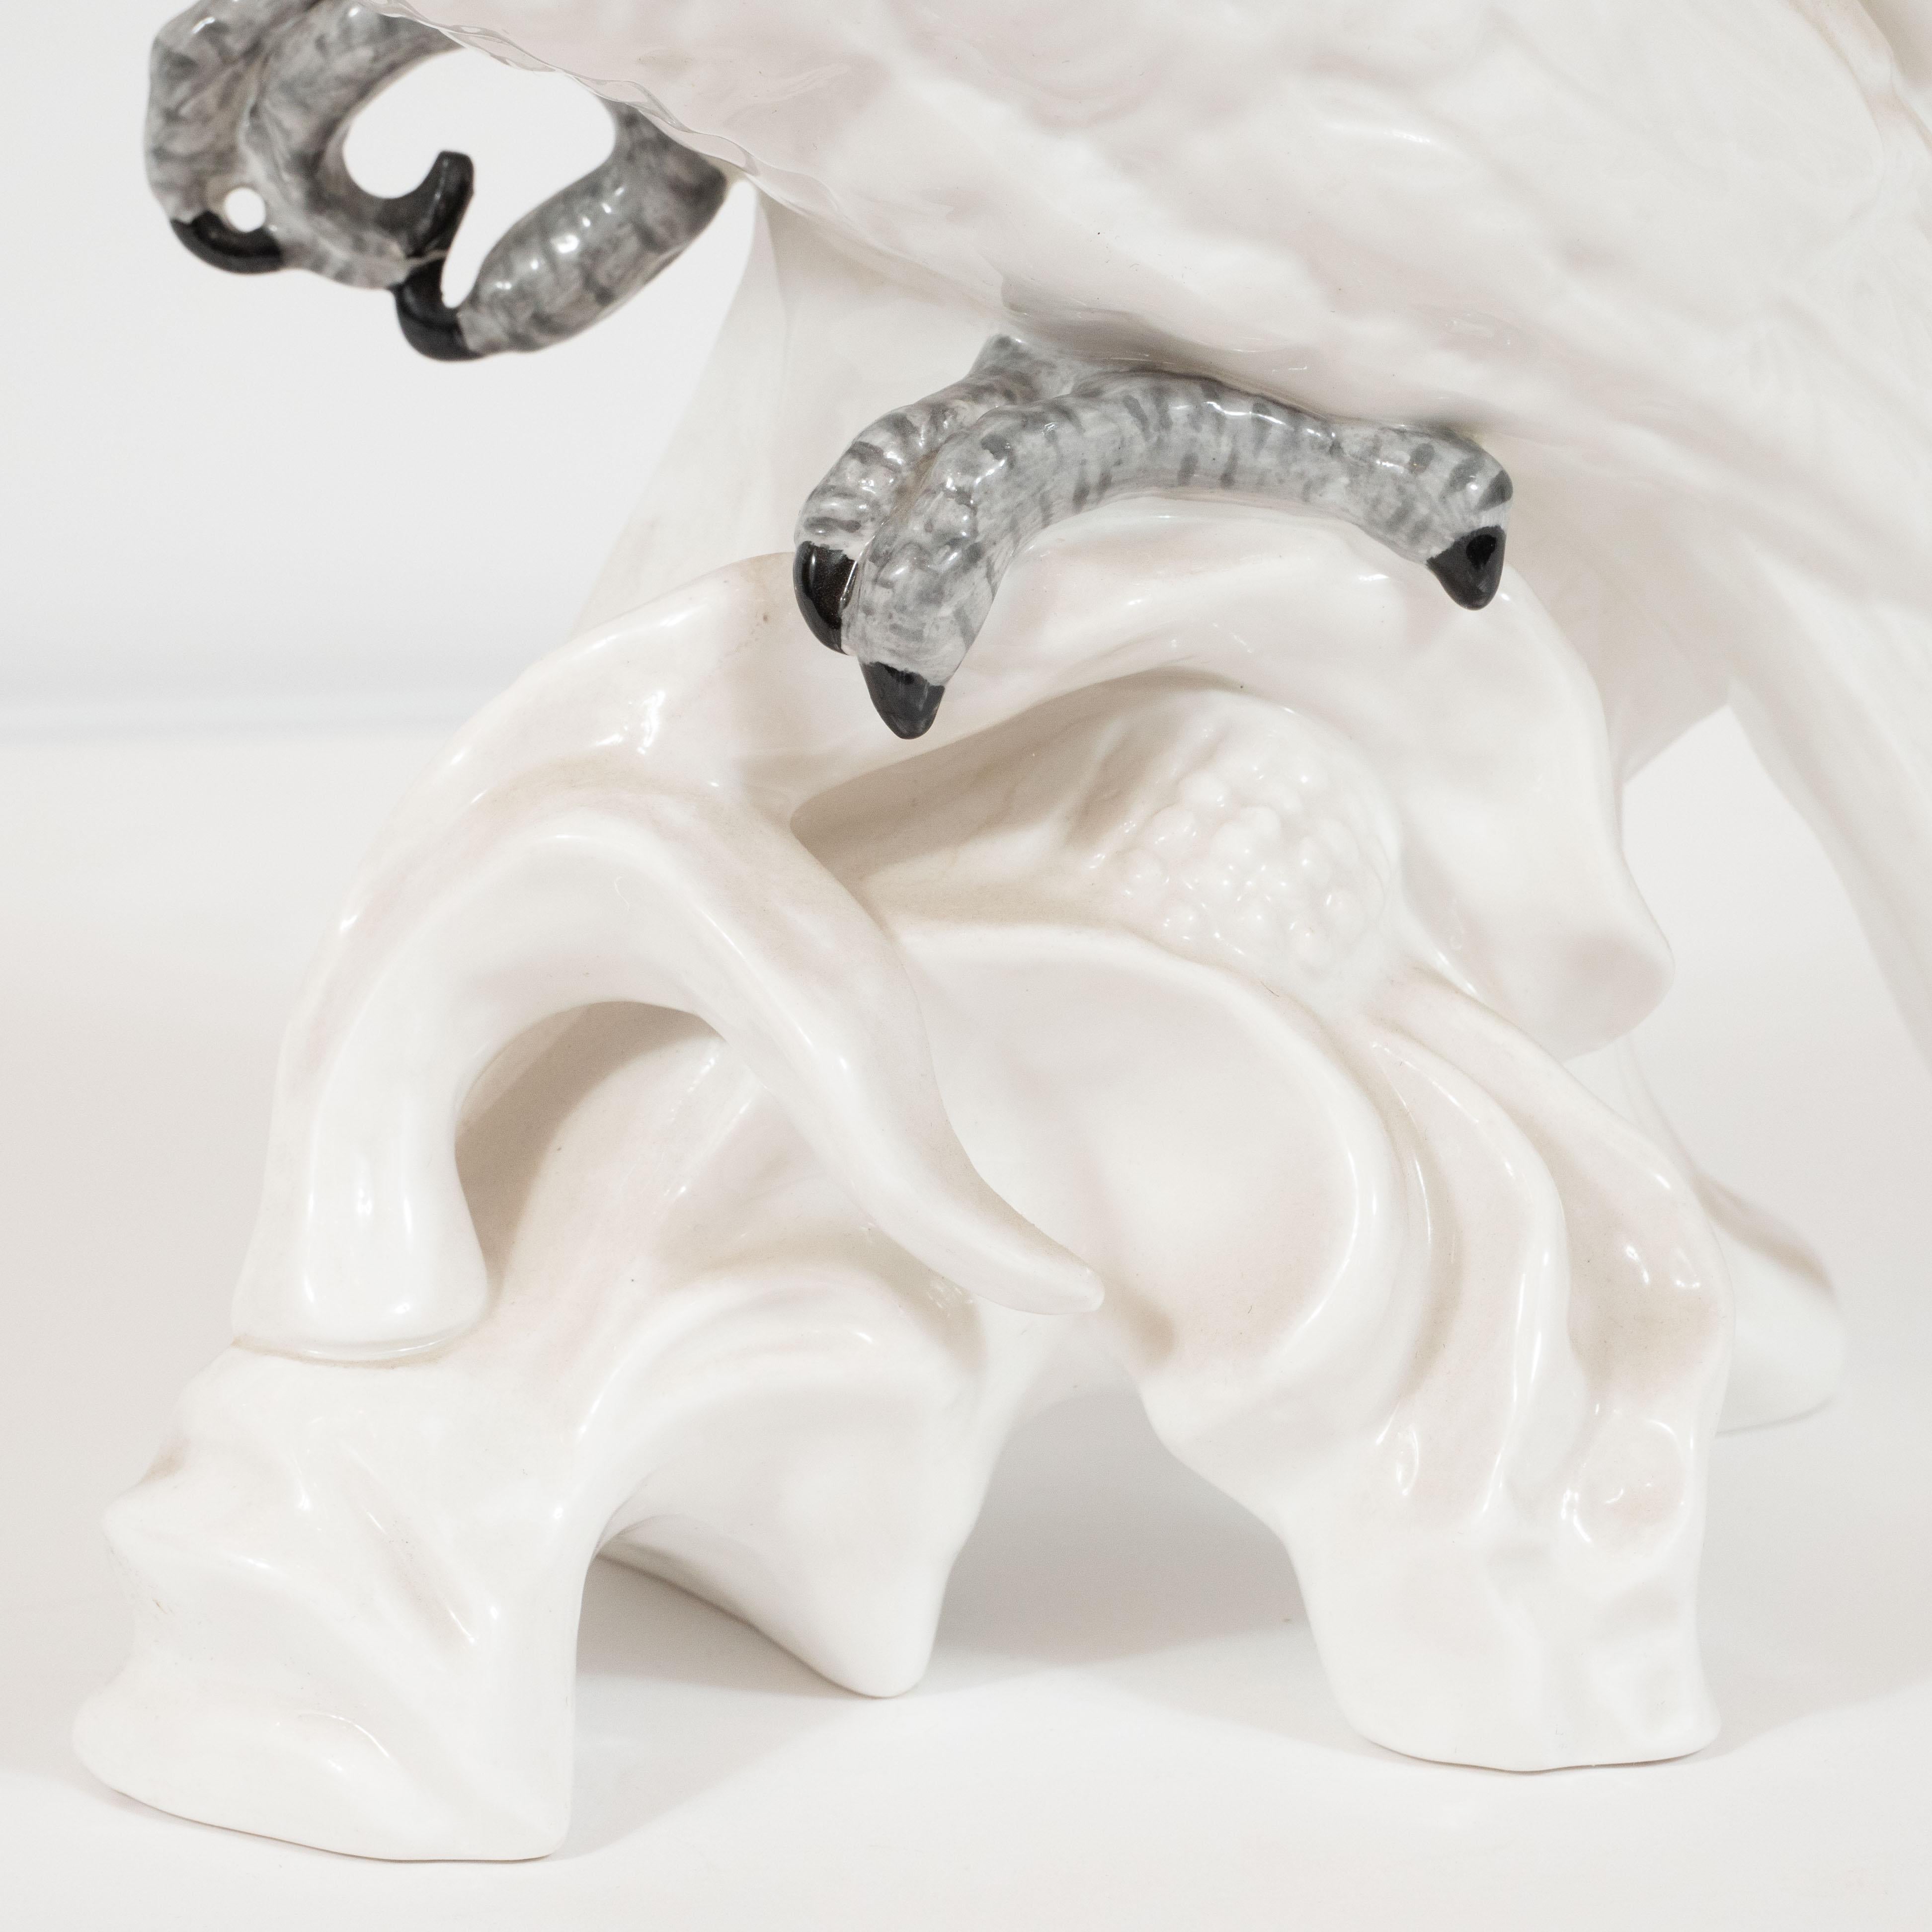 English Mid-Century Modern White Porcelain Cockatoo by T.J. Jones for Staffordshire